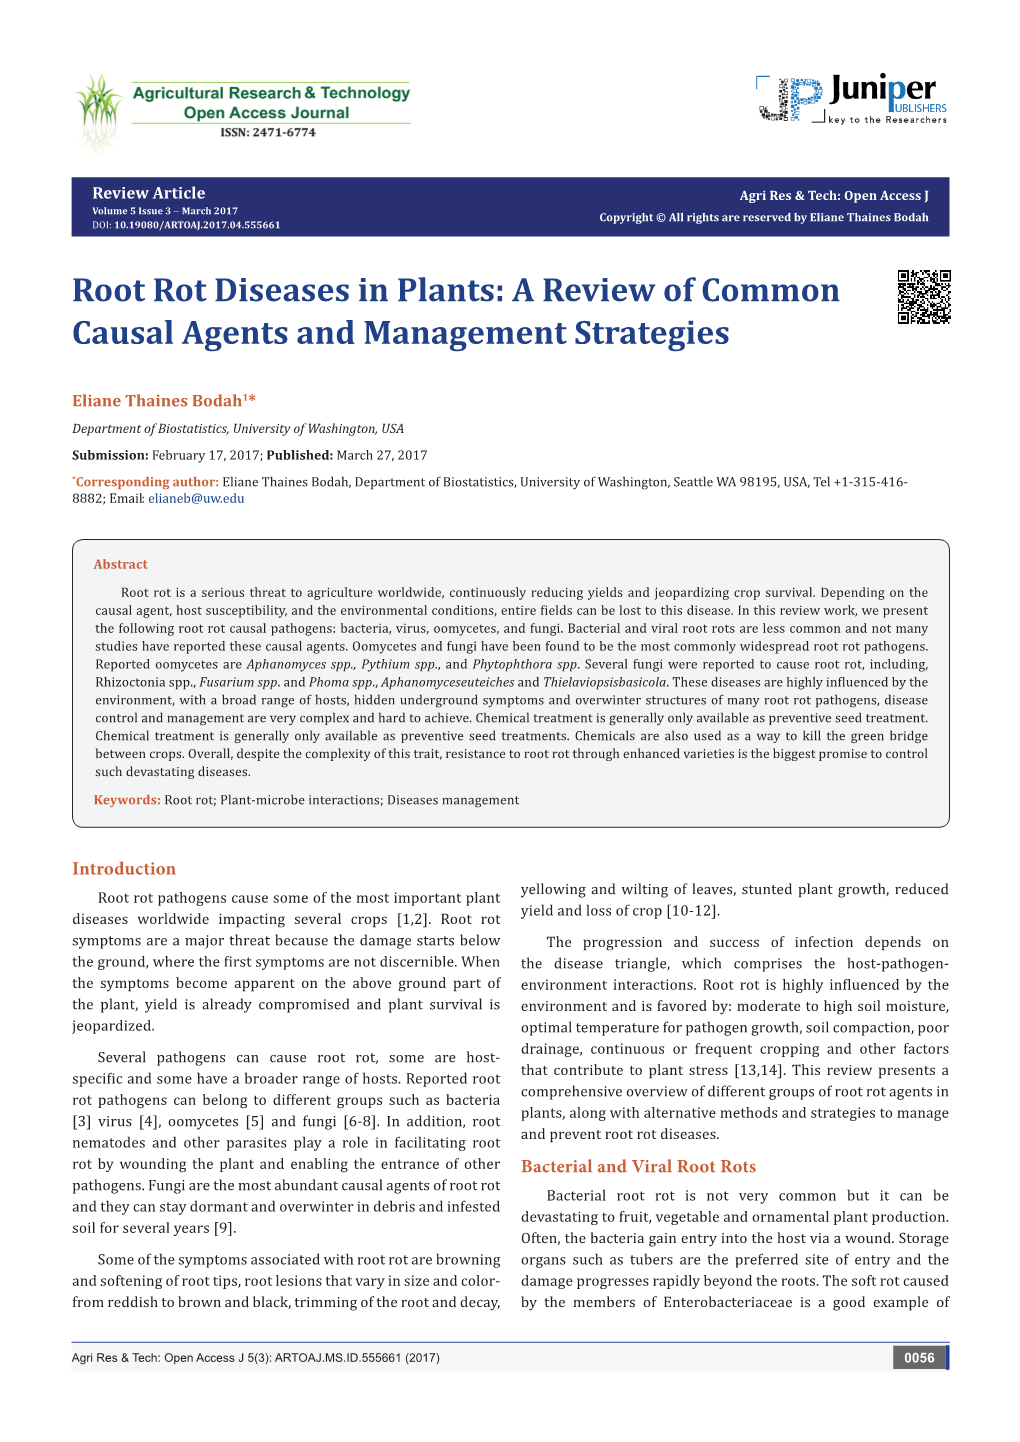 Root Rot Diseases in Plants: a Review of Common Causal Agents and Management Strategies